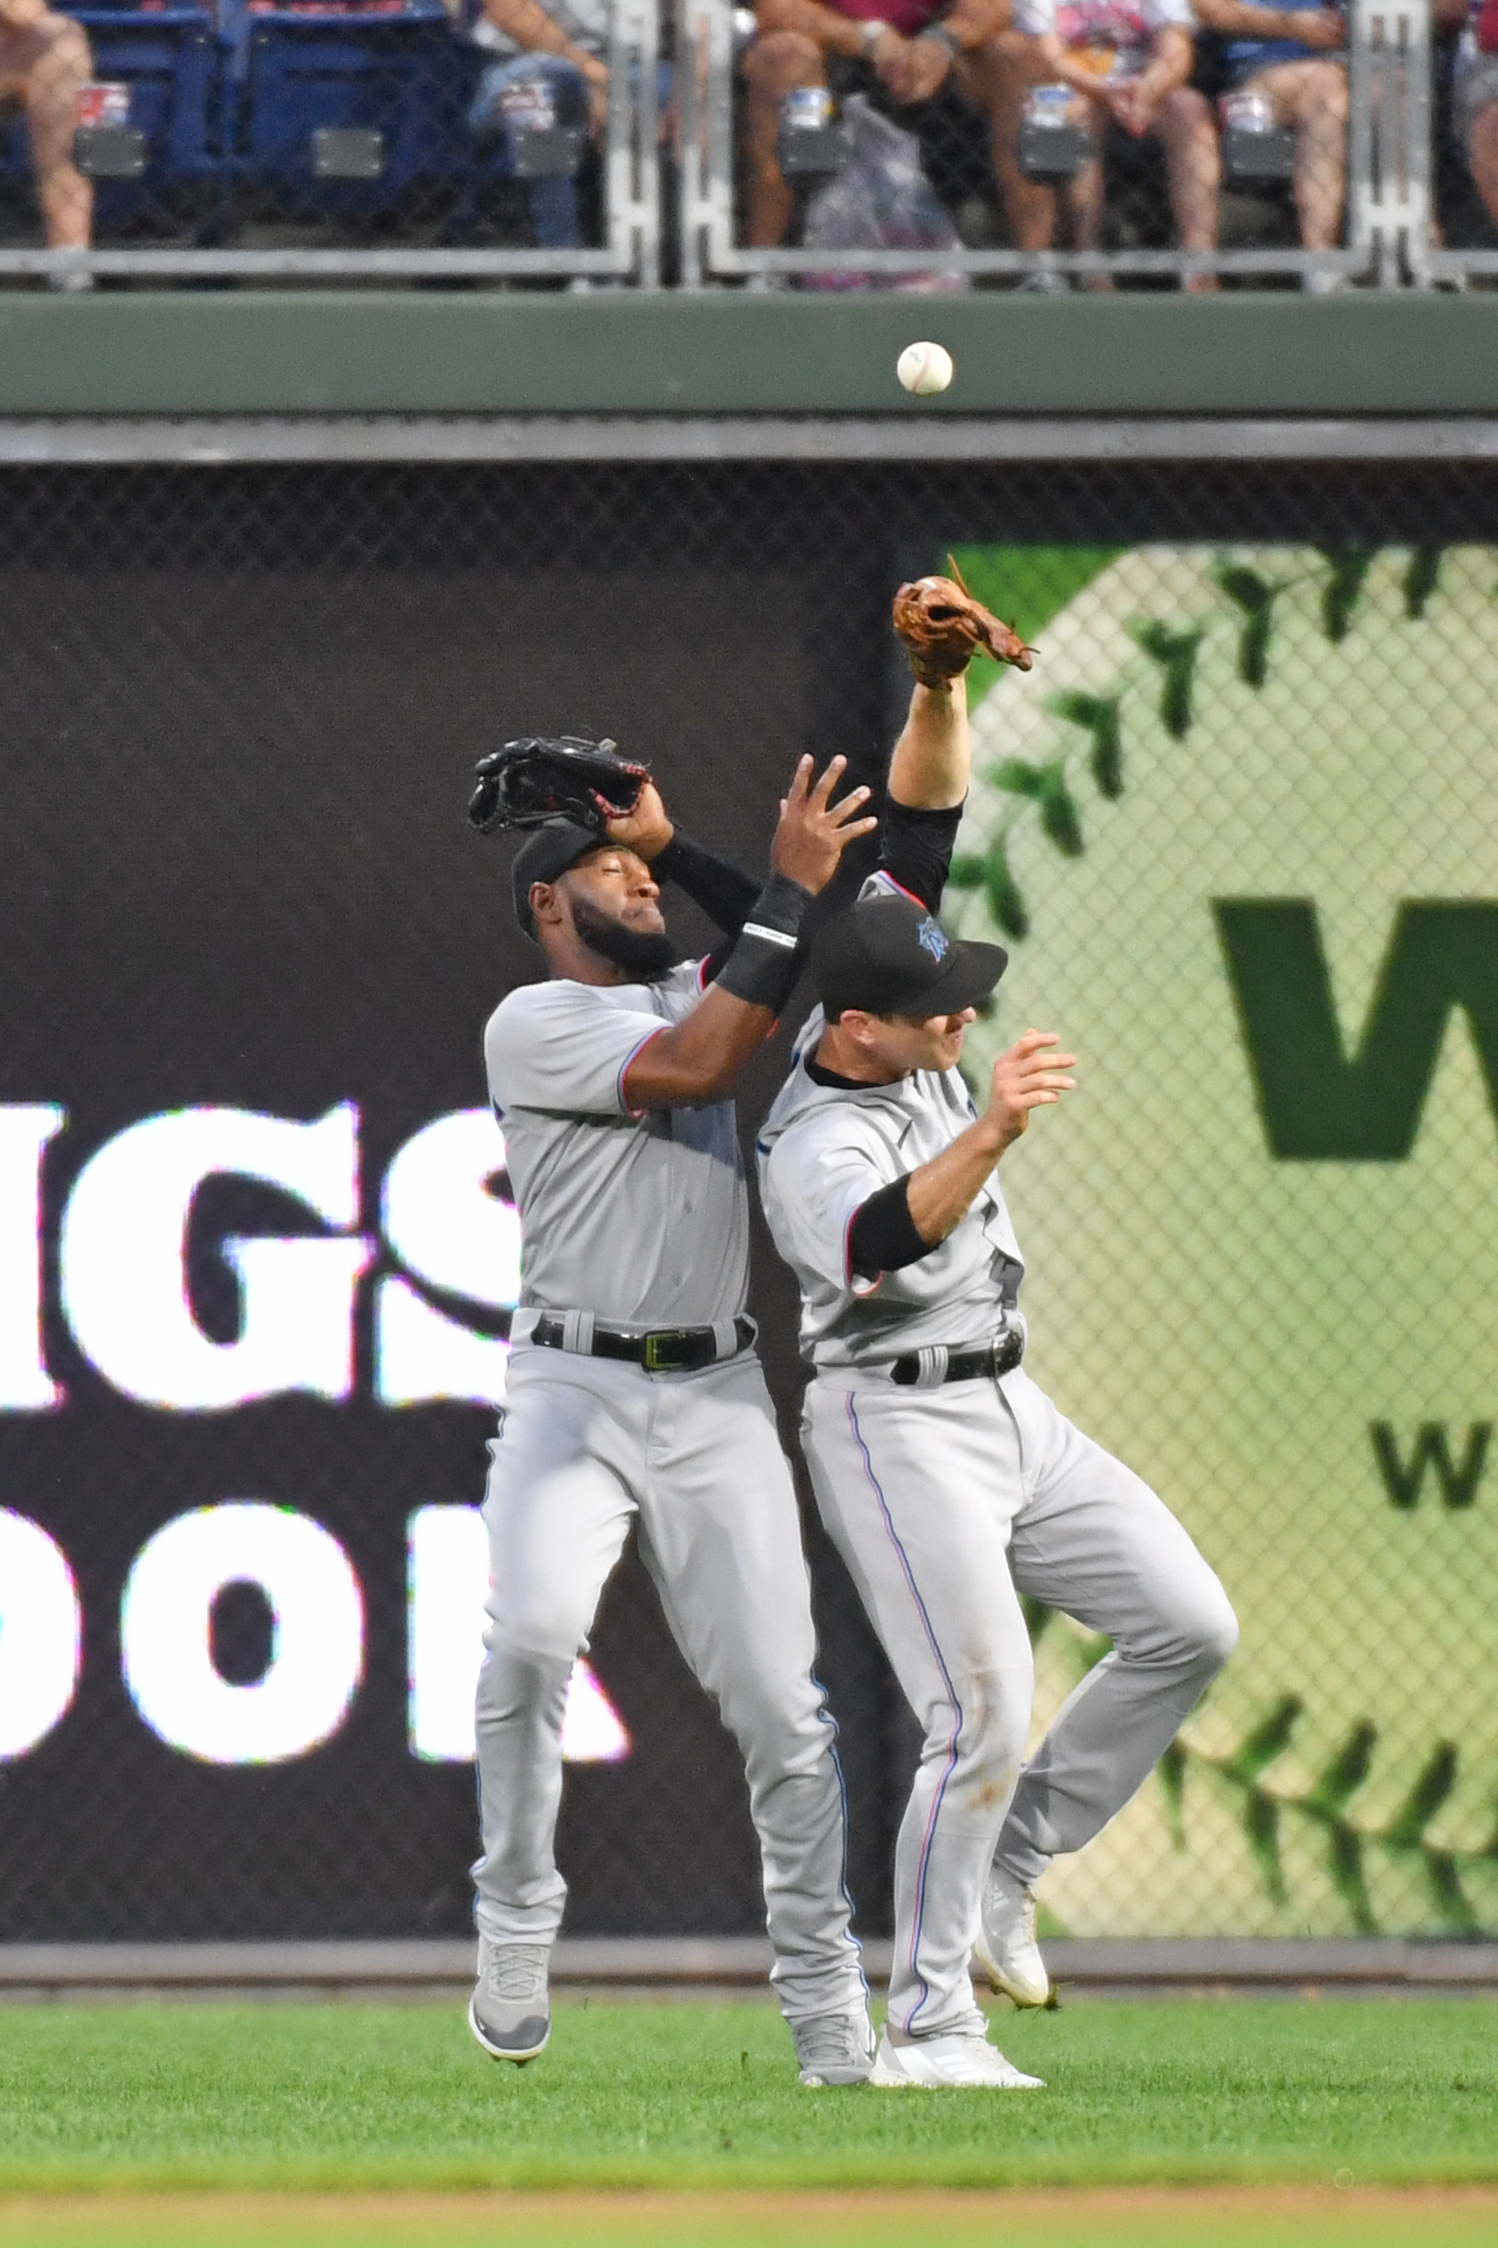 Miami Marlins left fielder Bryan De La Cruz (14) and second baseman Joey Wendle (18) collide while trying to catch a fly ball against the Philadelphia Phillies during the first inning at Citizens Bank Park.